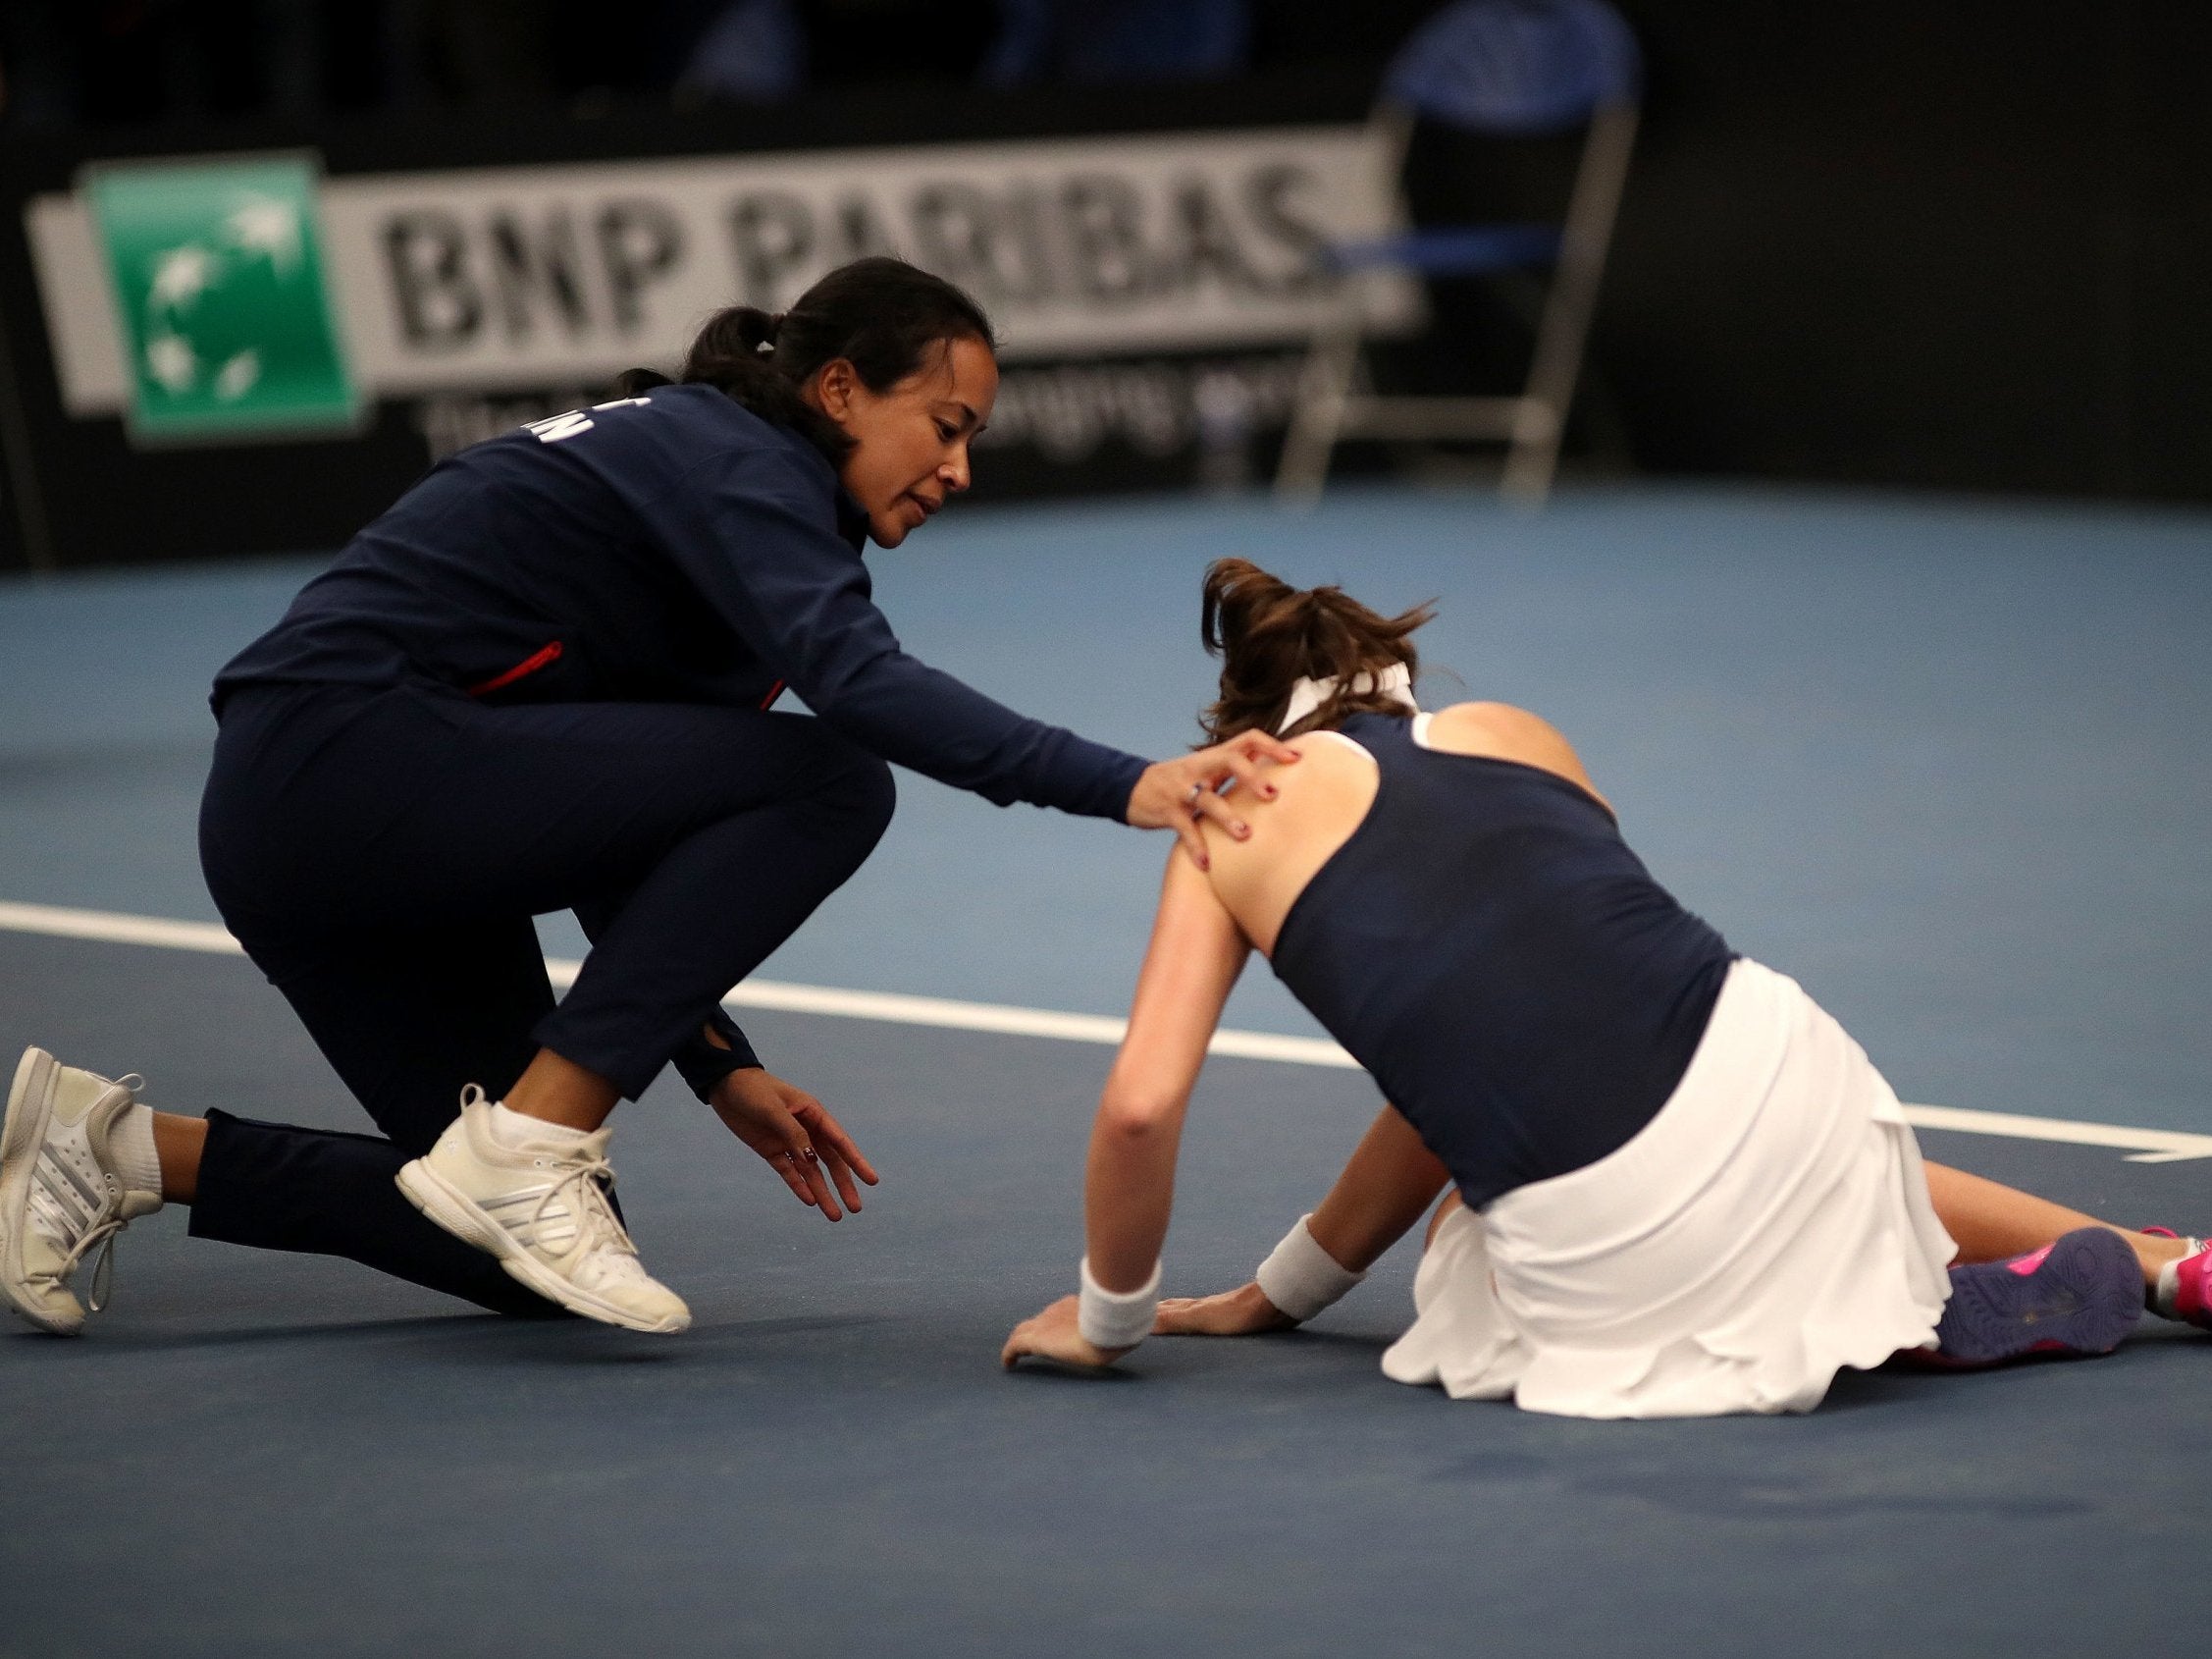 Konta battled through to secure victory